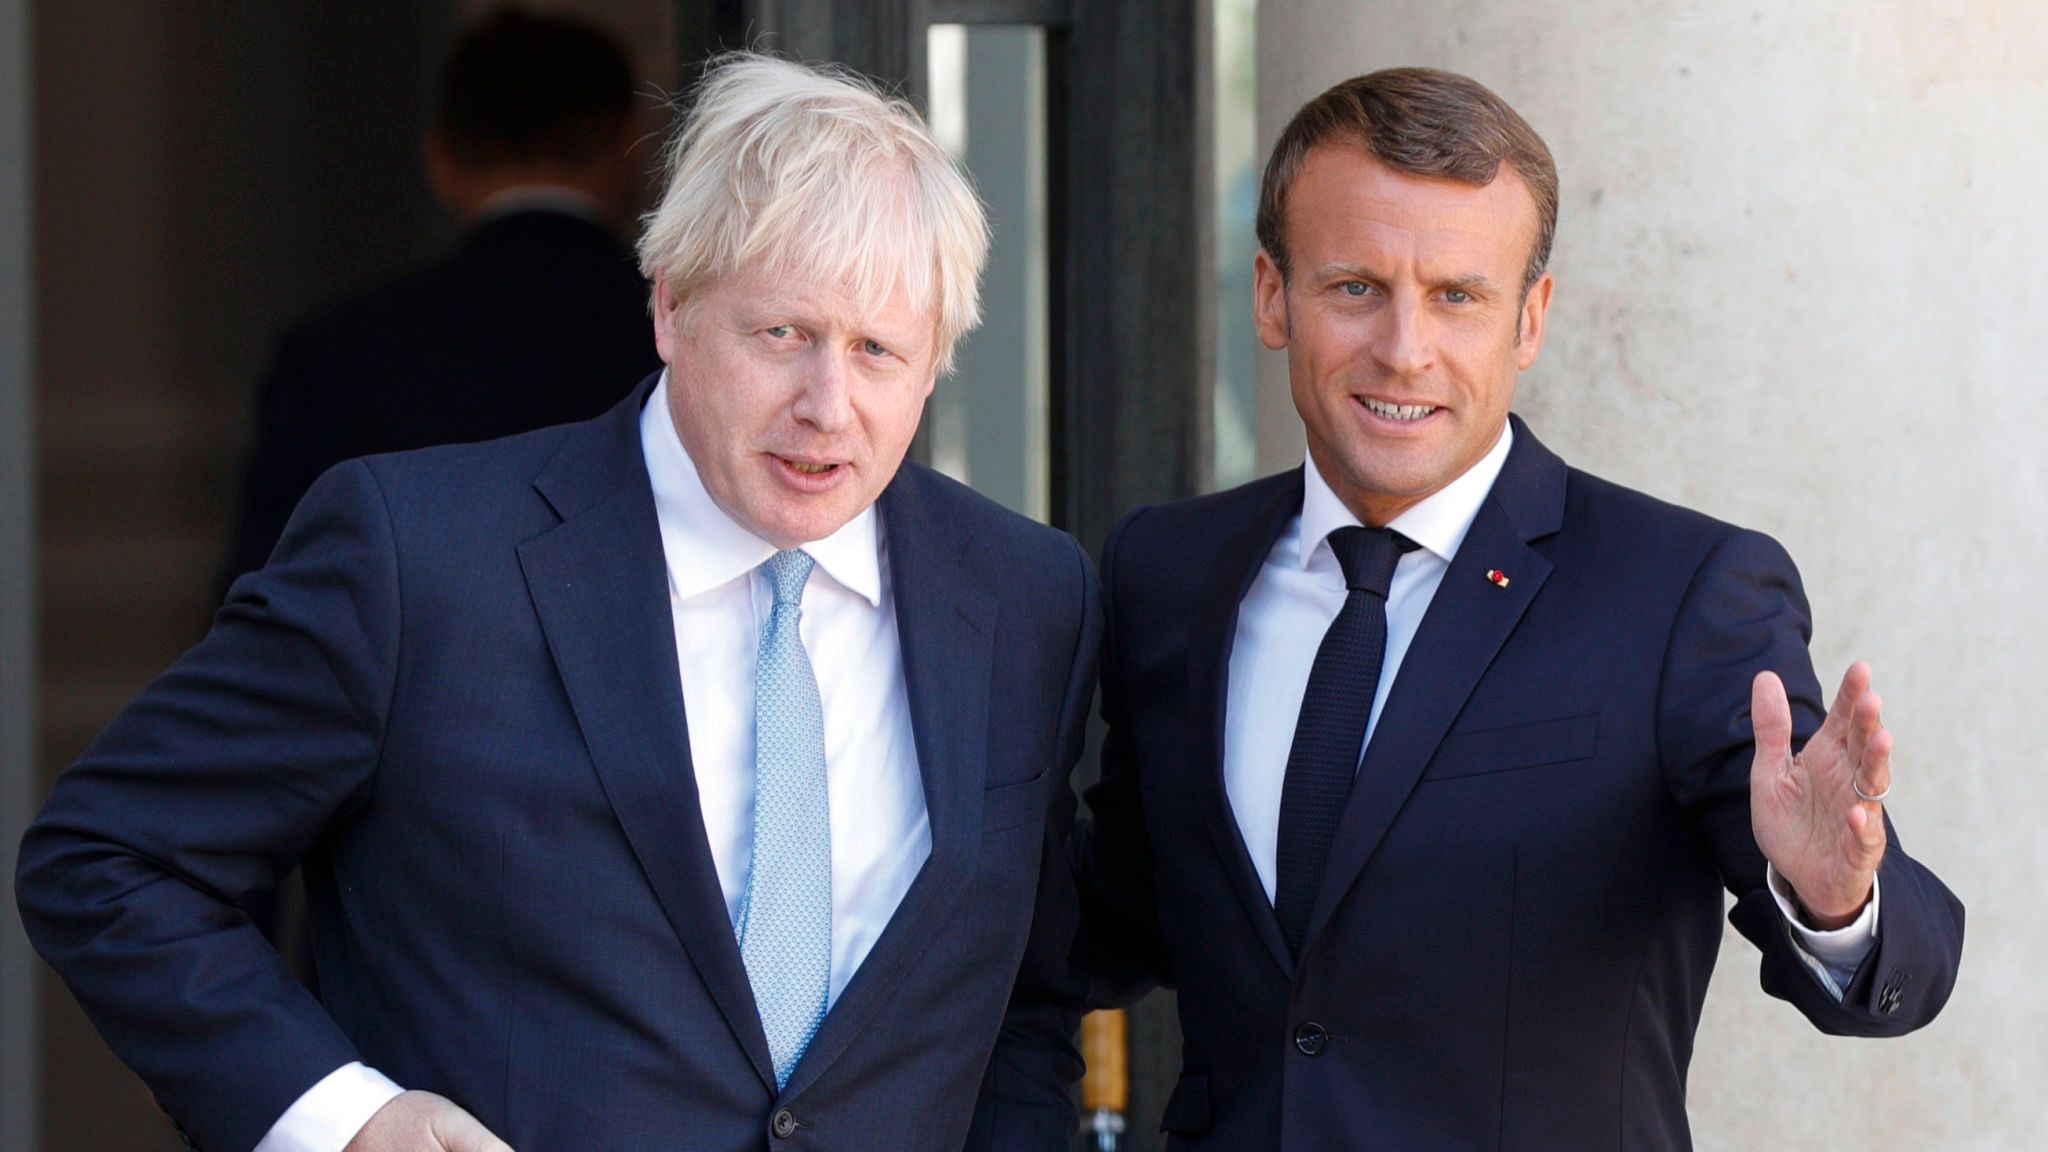 Brexit: EU decision on Boris Johnson’s deal could happen by ‘end of the week’